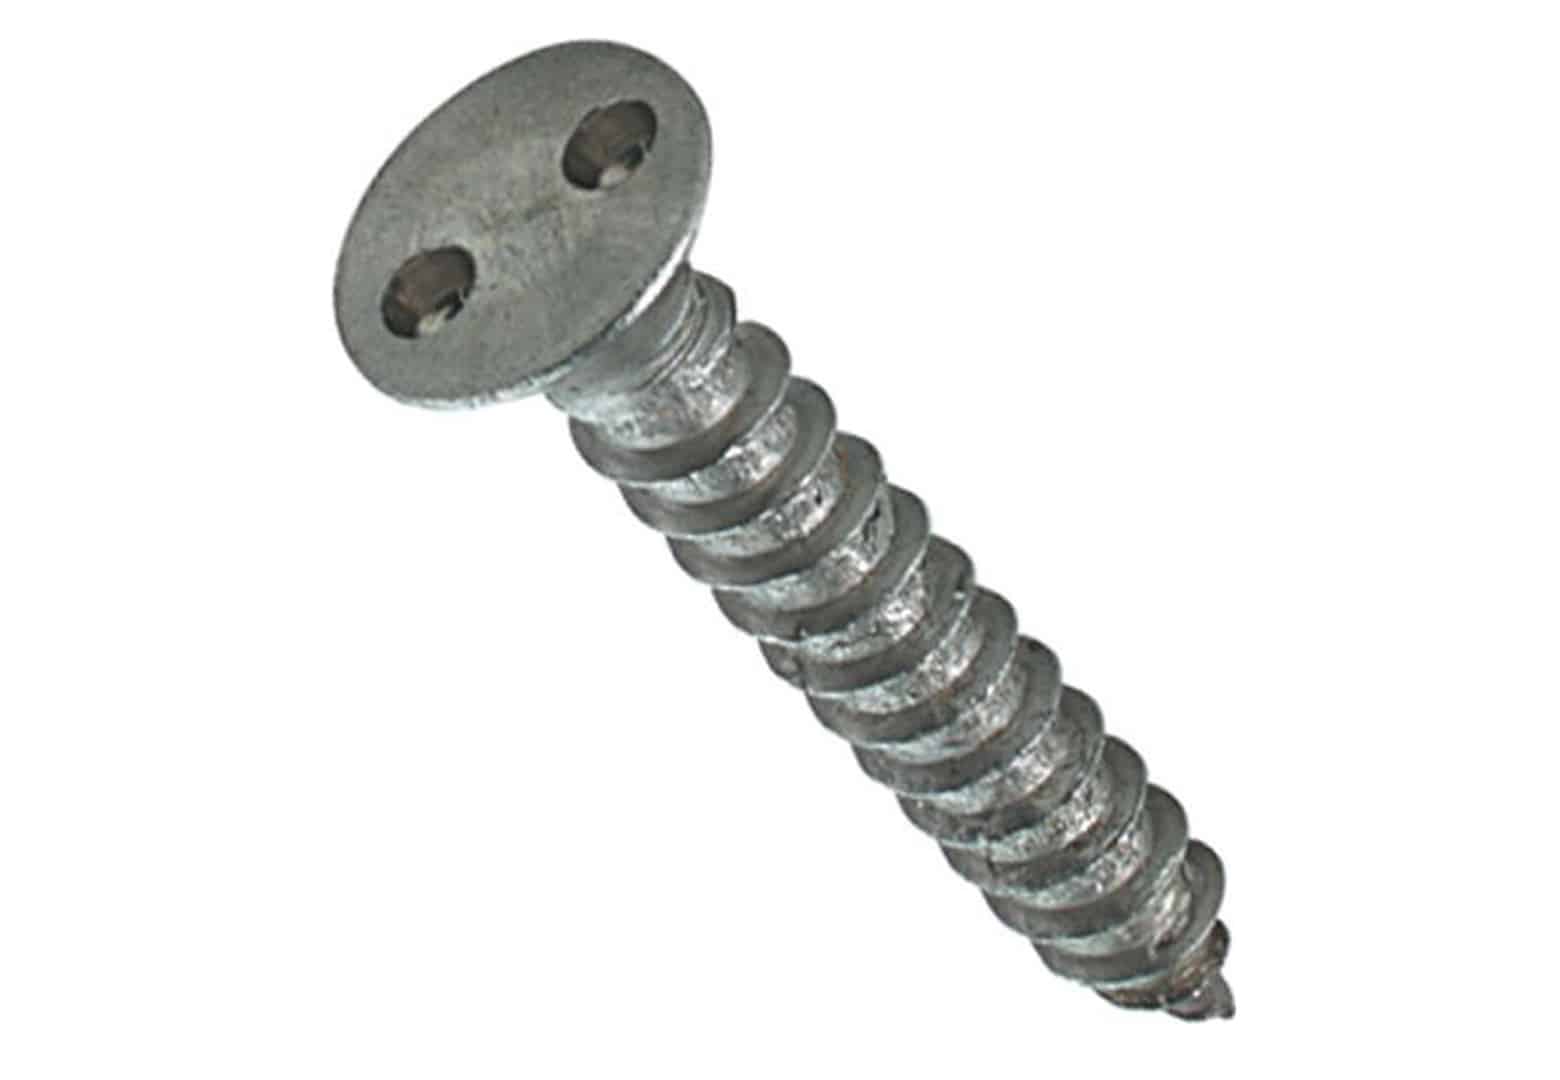 CSK Head (Flat Head) Two Hole Self-tapping Screw